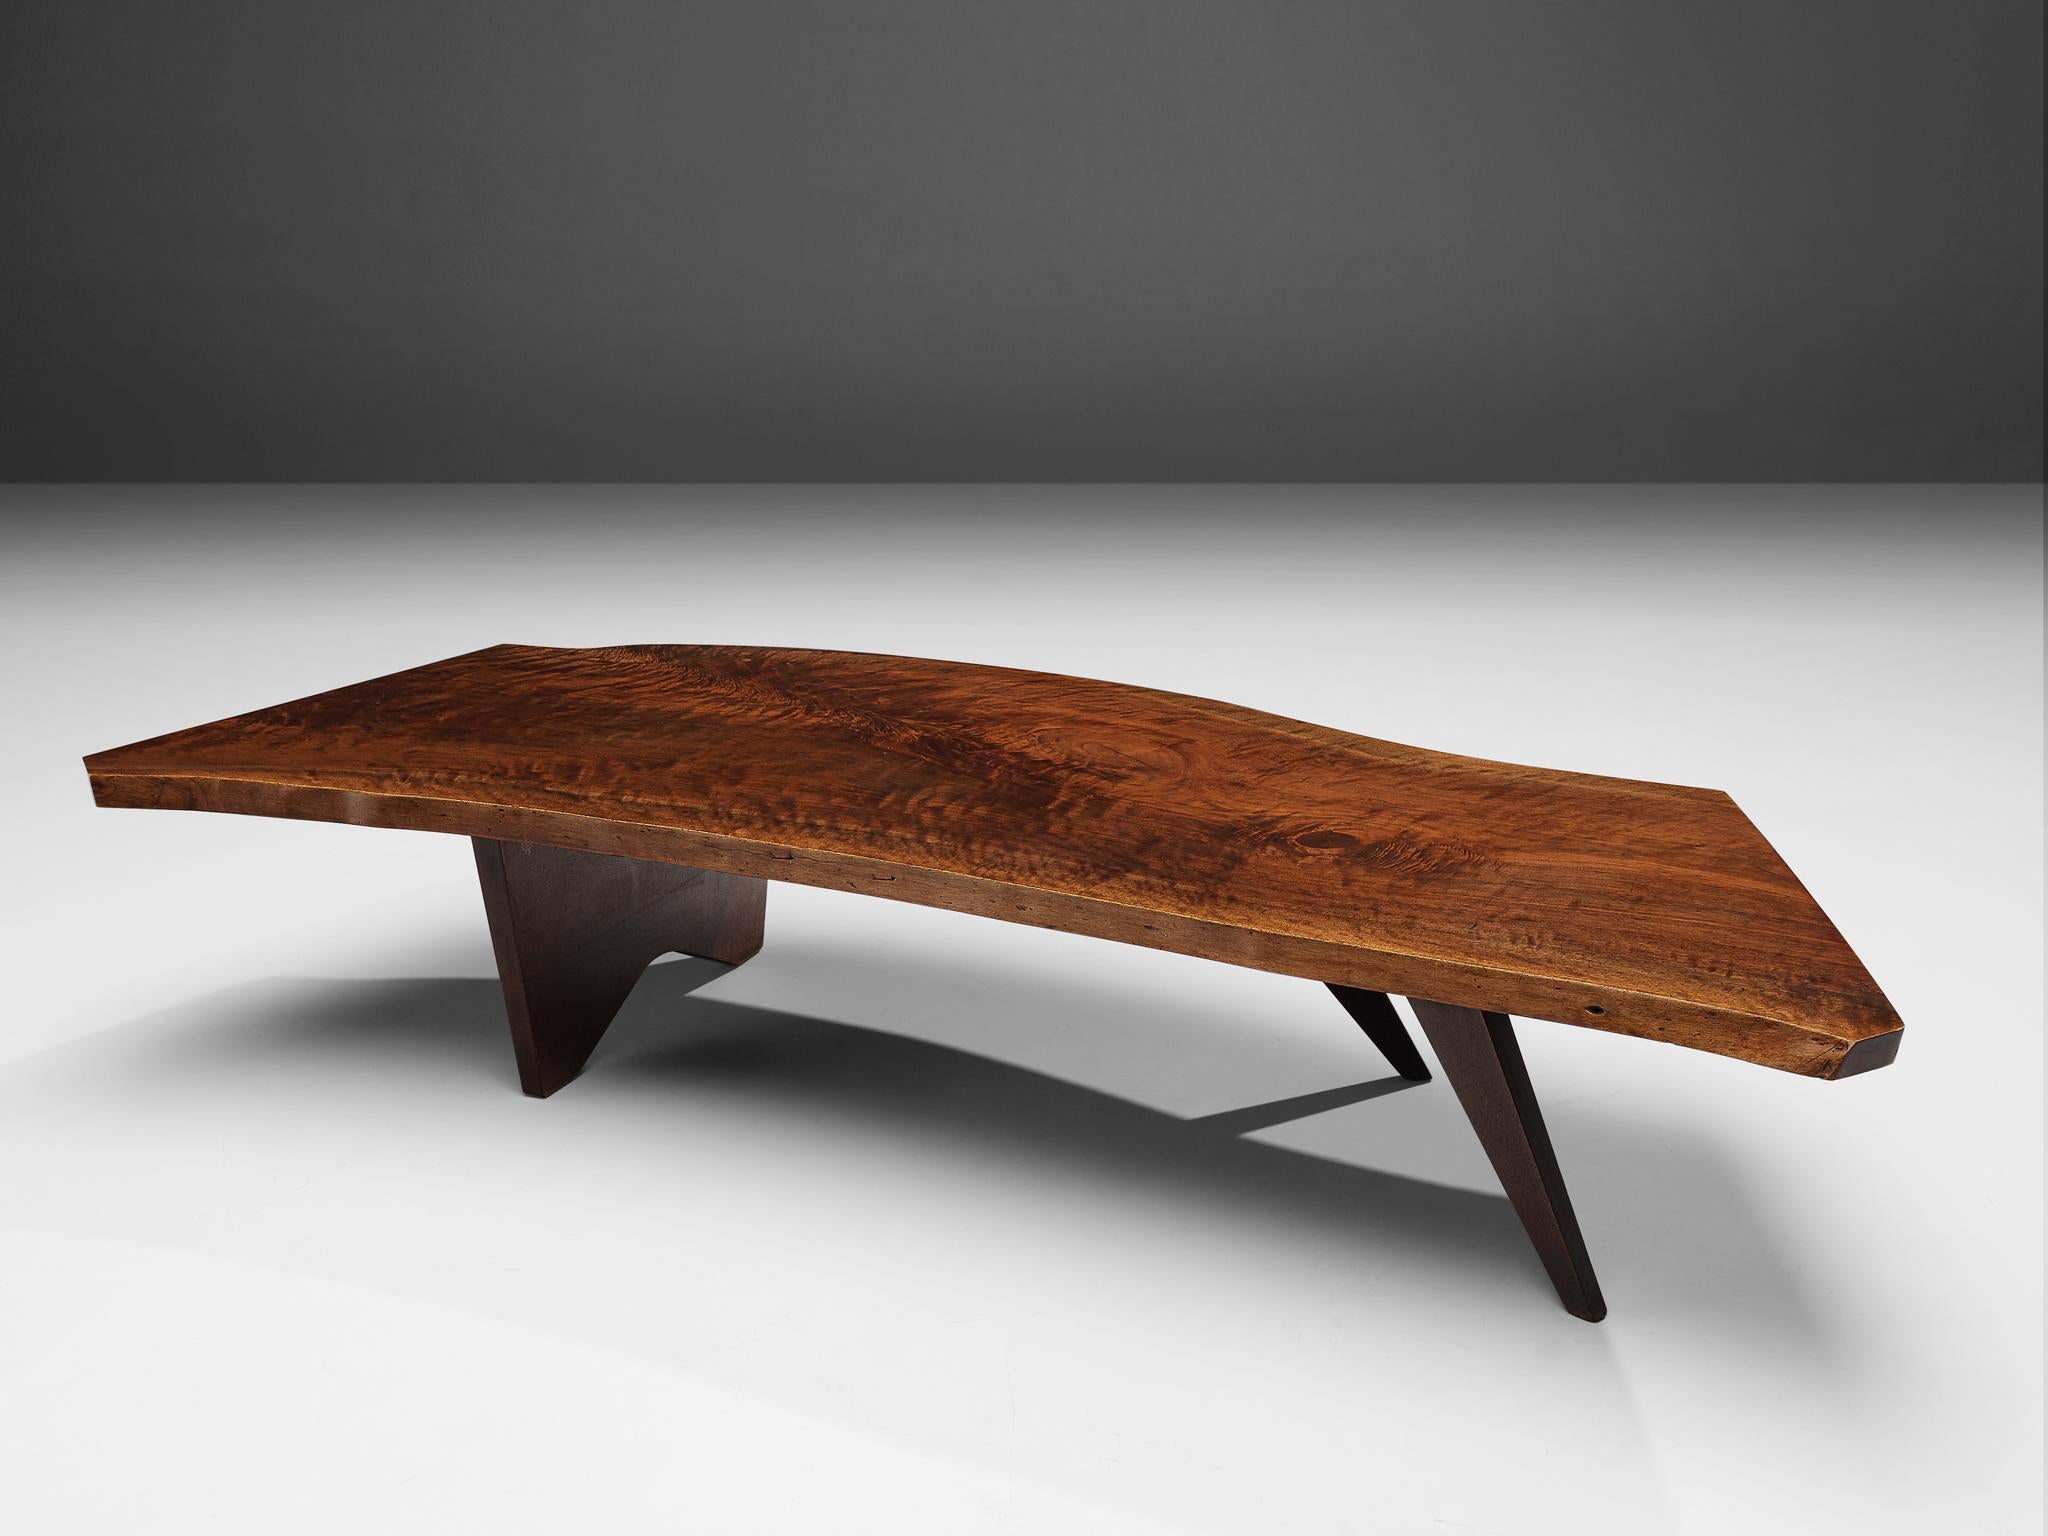 George Nakashima, 'Slab' coffee table, American black walnut, United States, 1960s

American woodworker and designer George Nakashima proves with this quintessential table that he is a true master of his craft. The impressive coffee table, created